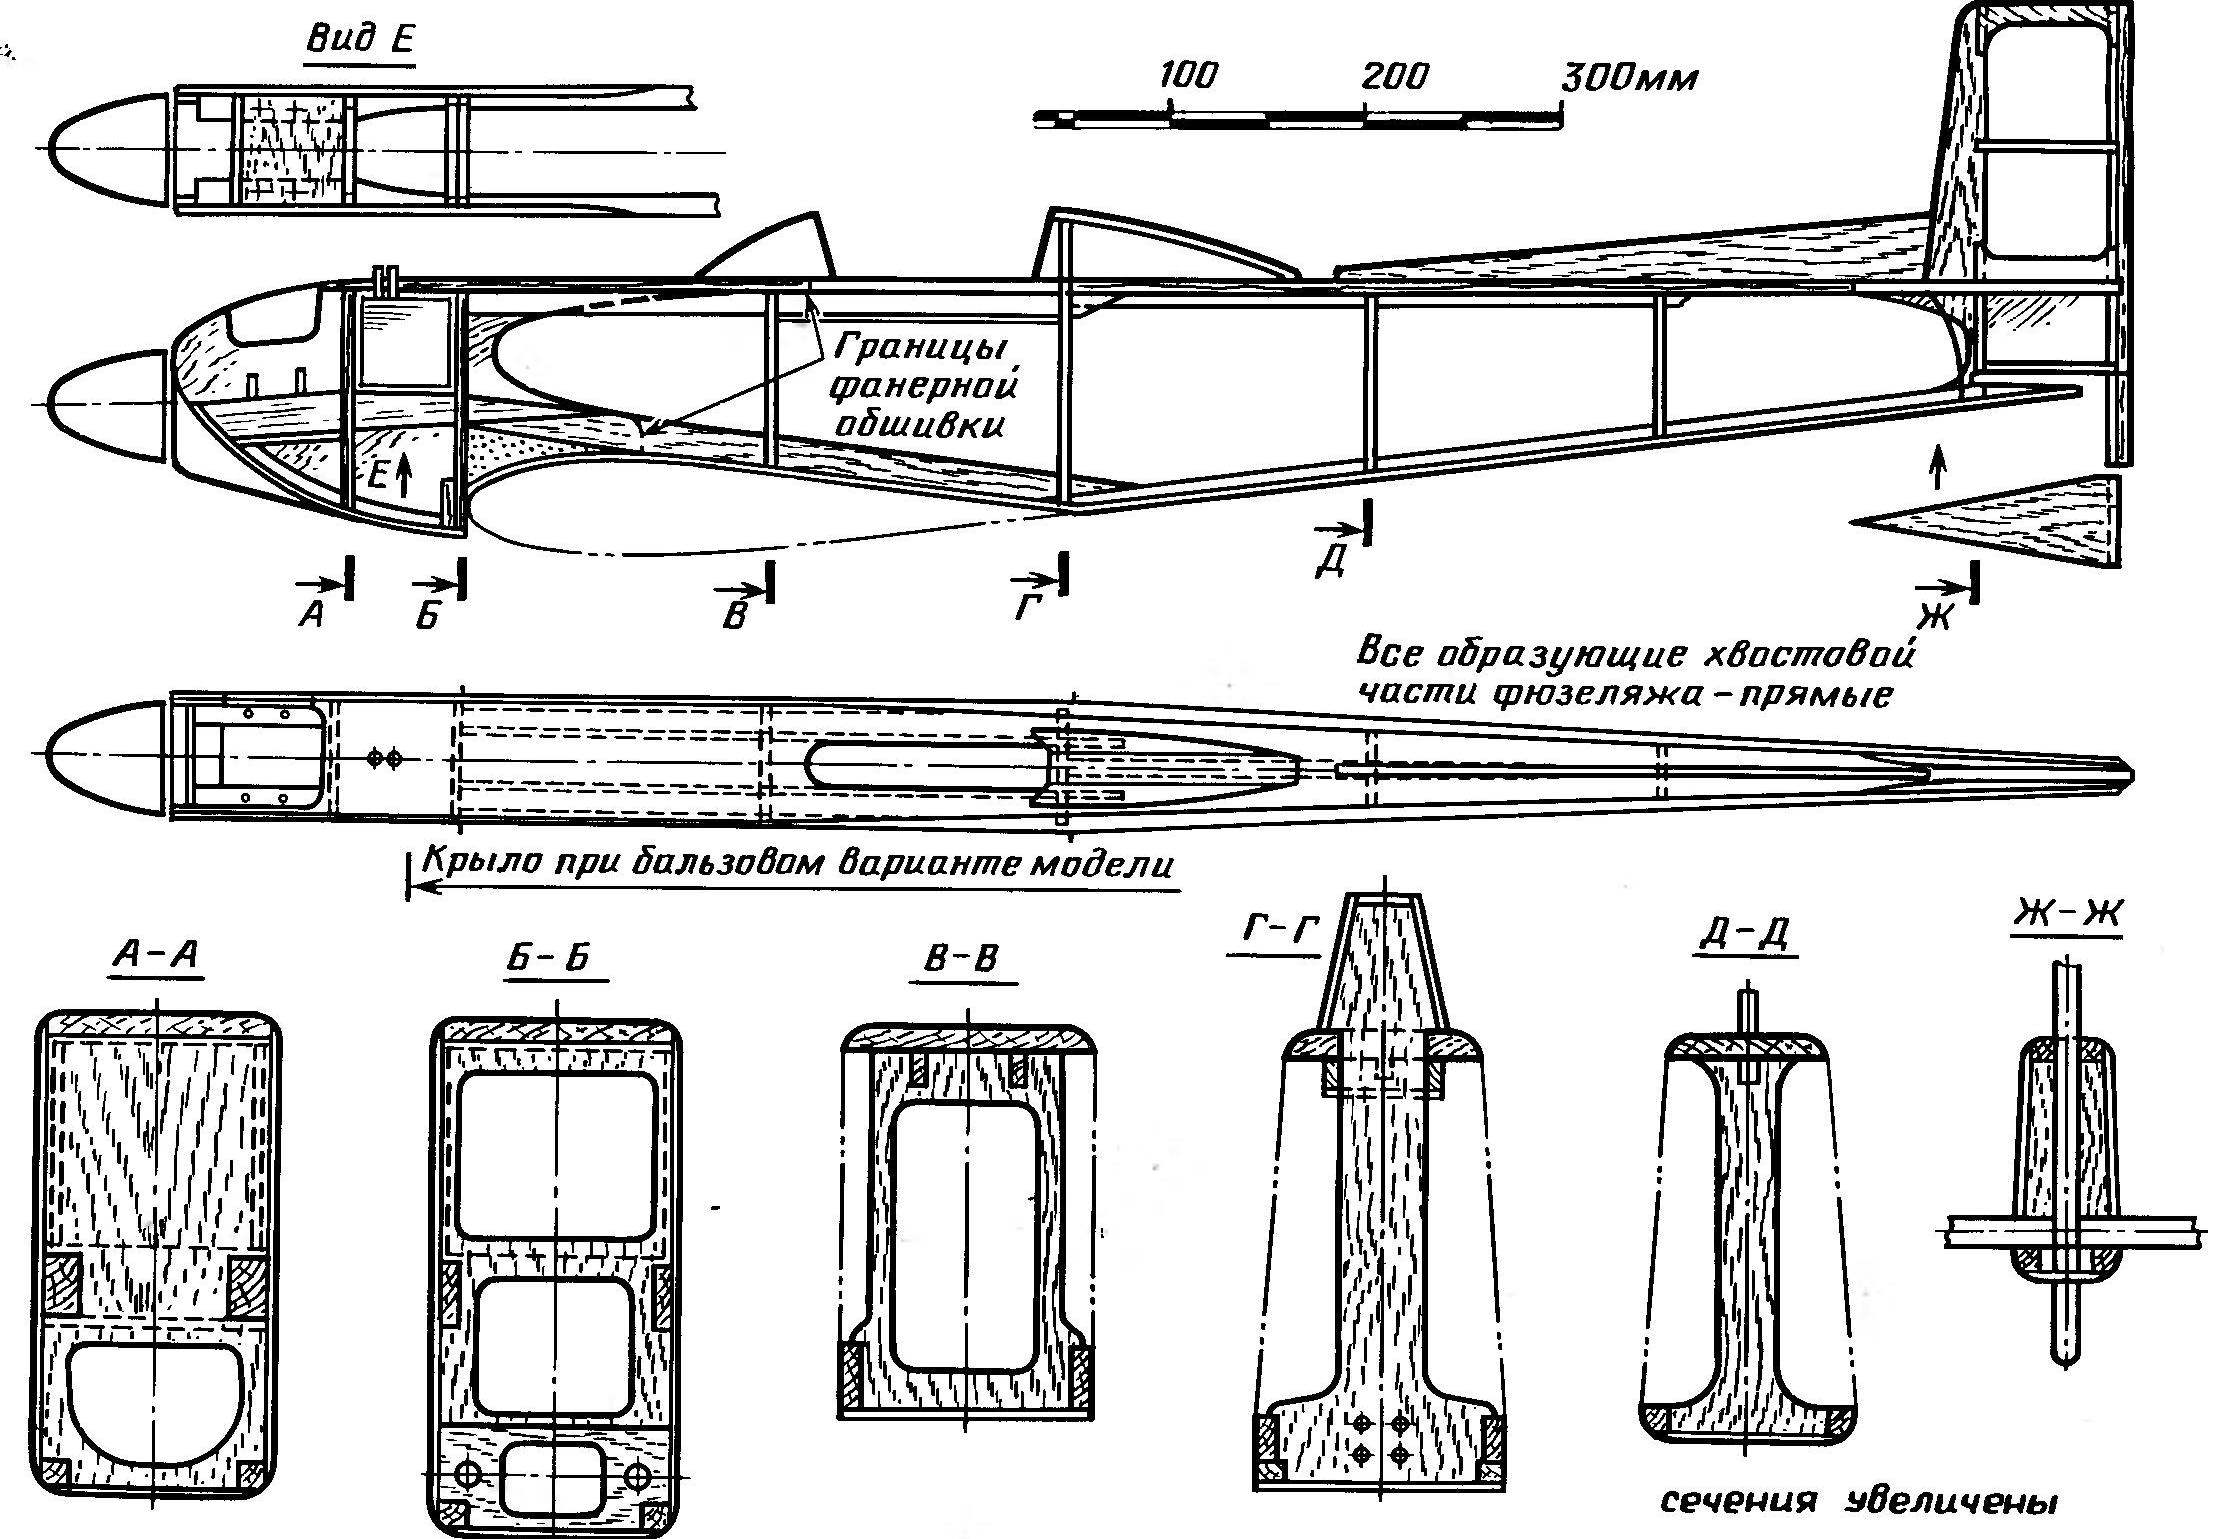 R and p. 4. The design of the fuselage